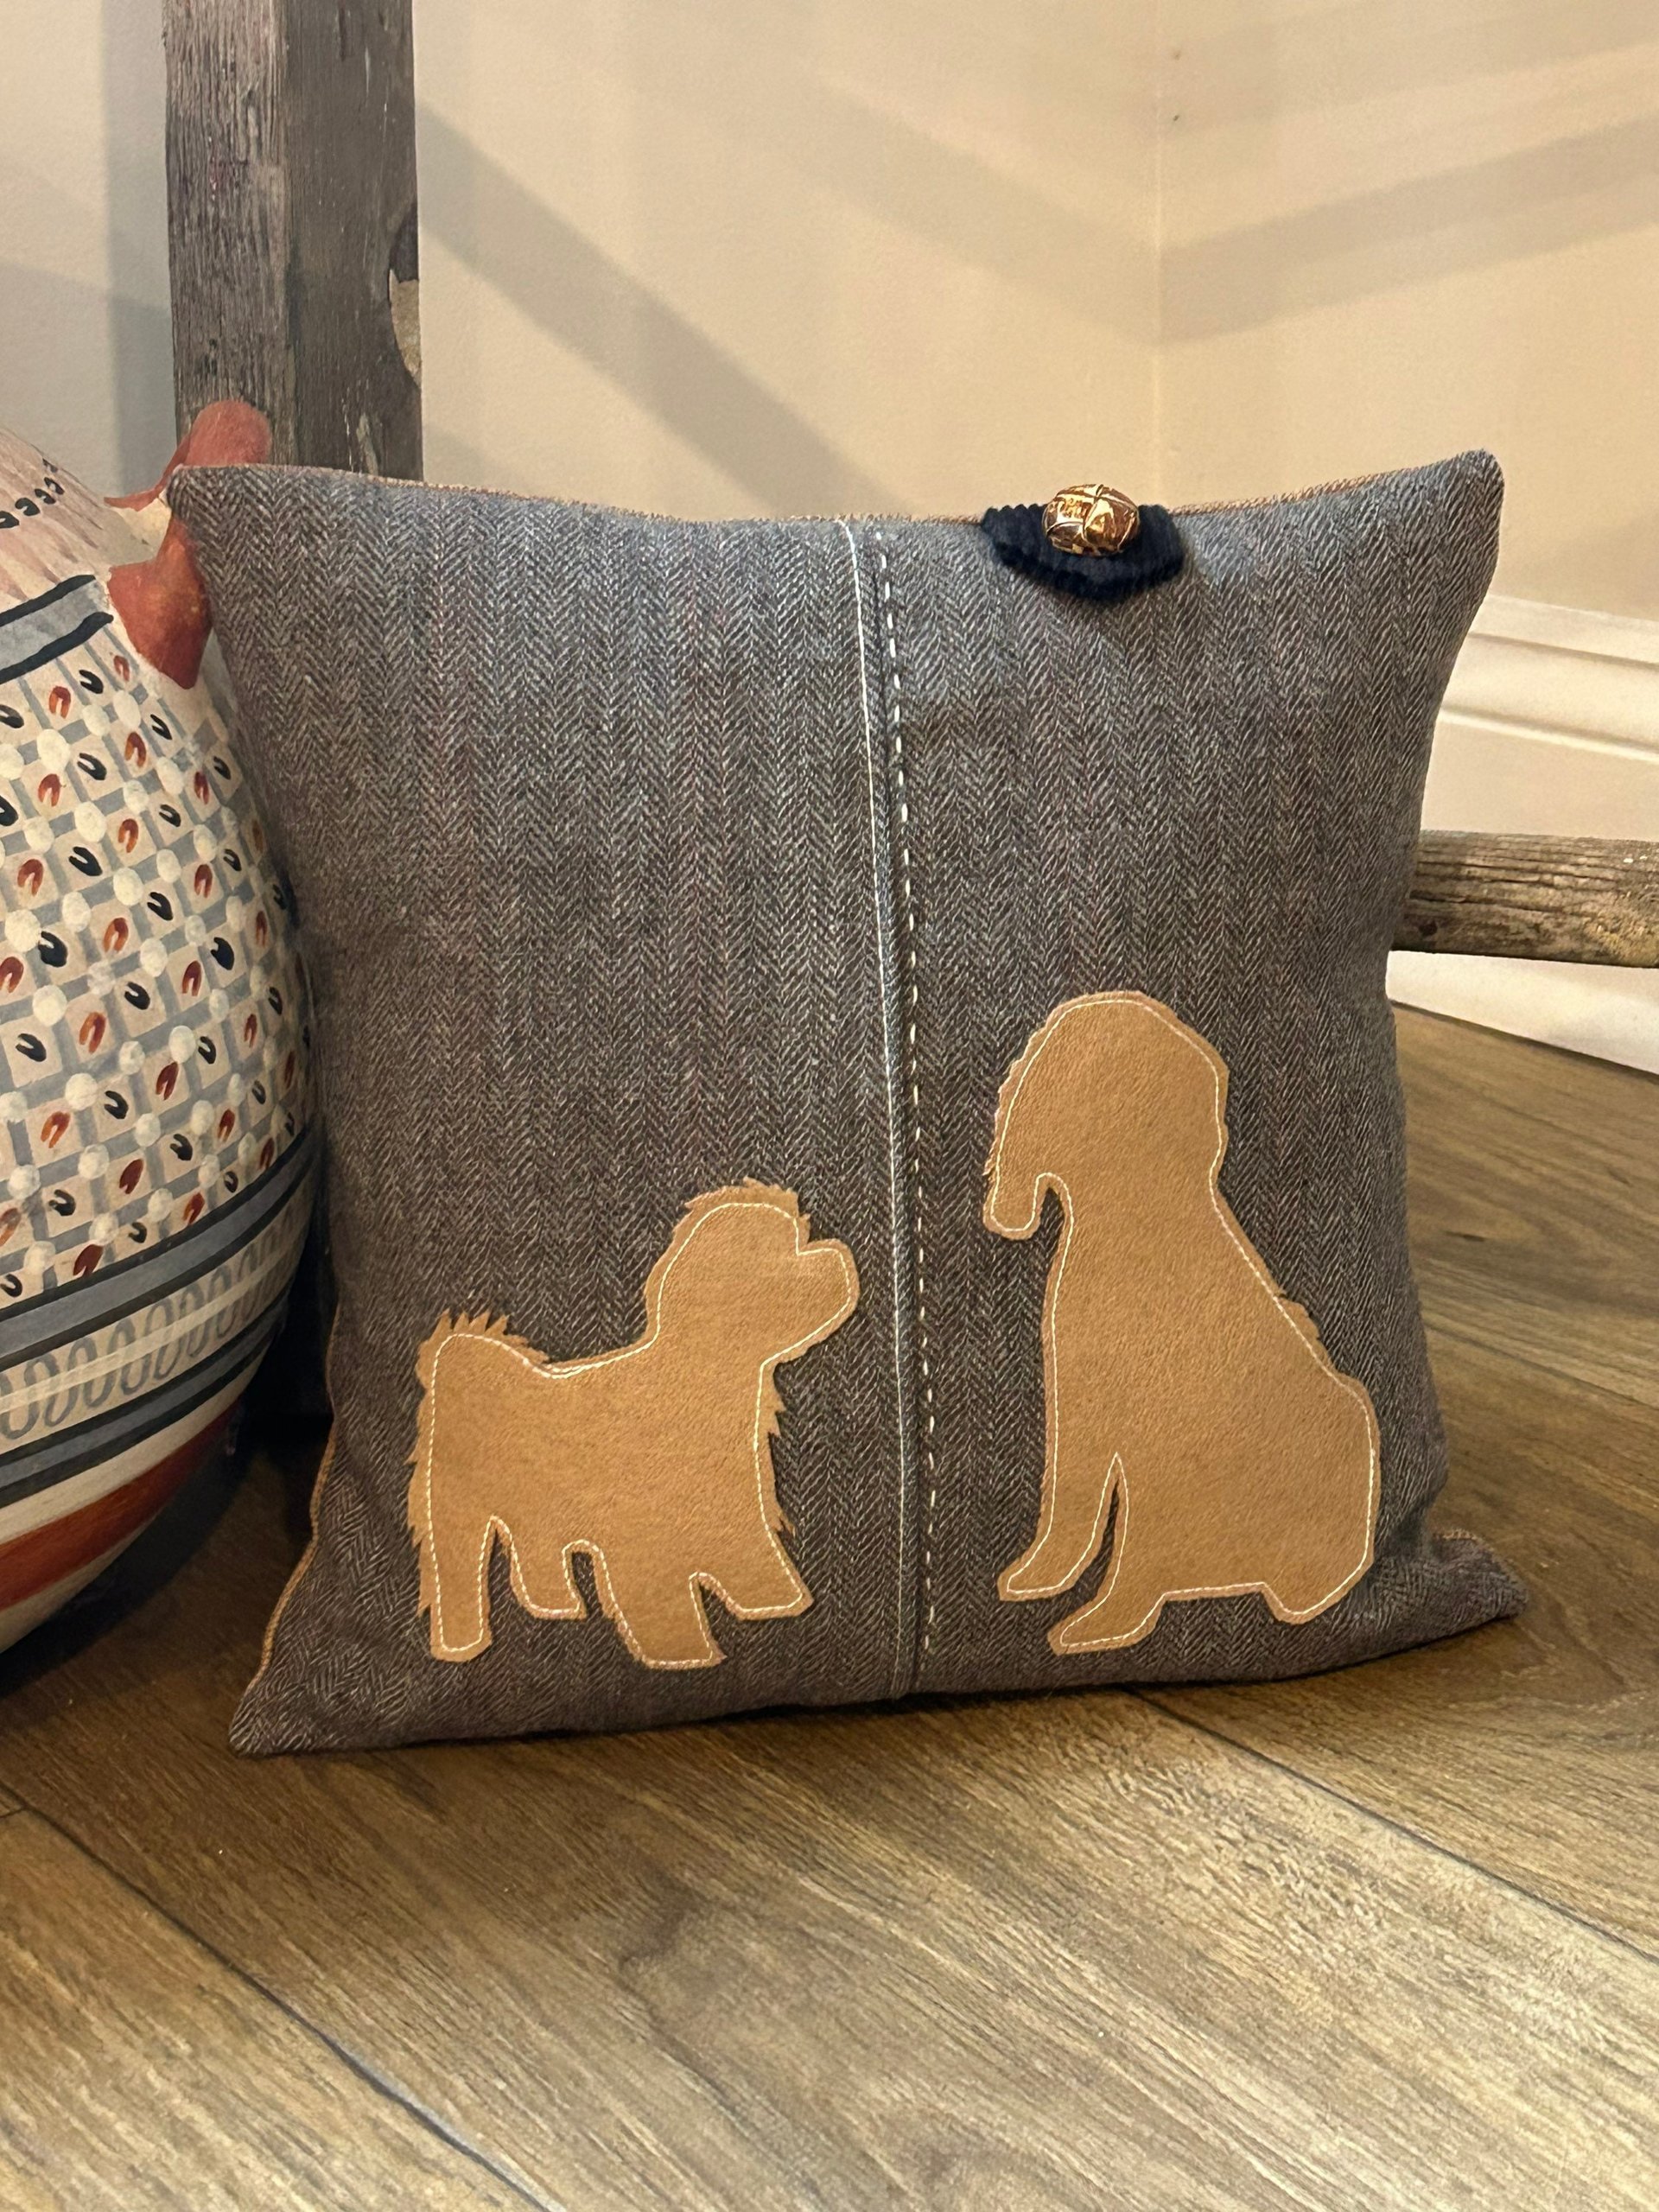 Shih Tzu Dog, Doodle Wool Tweed PILLOW, Recycled, Vintage Fabric Eco-Friendly Décor, Small Breed Lover